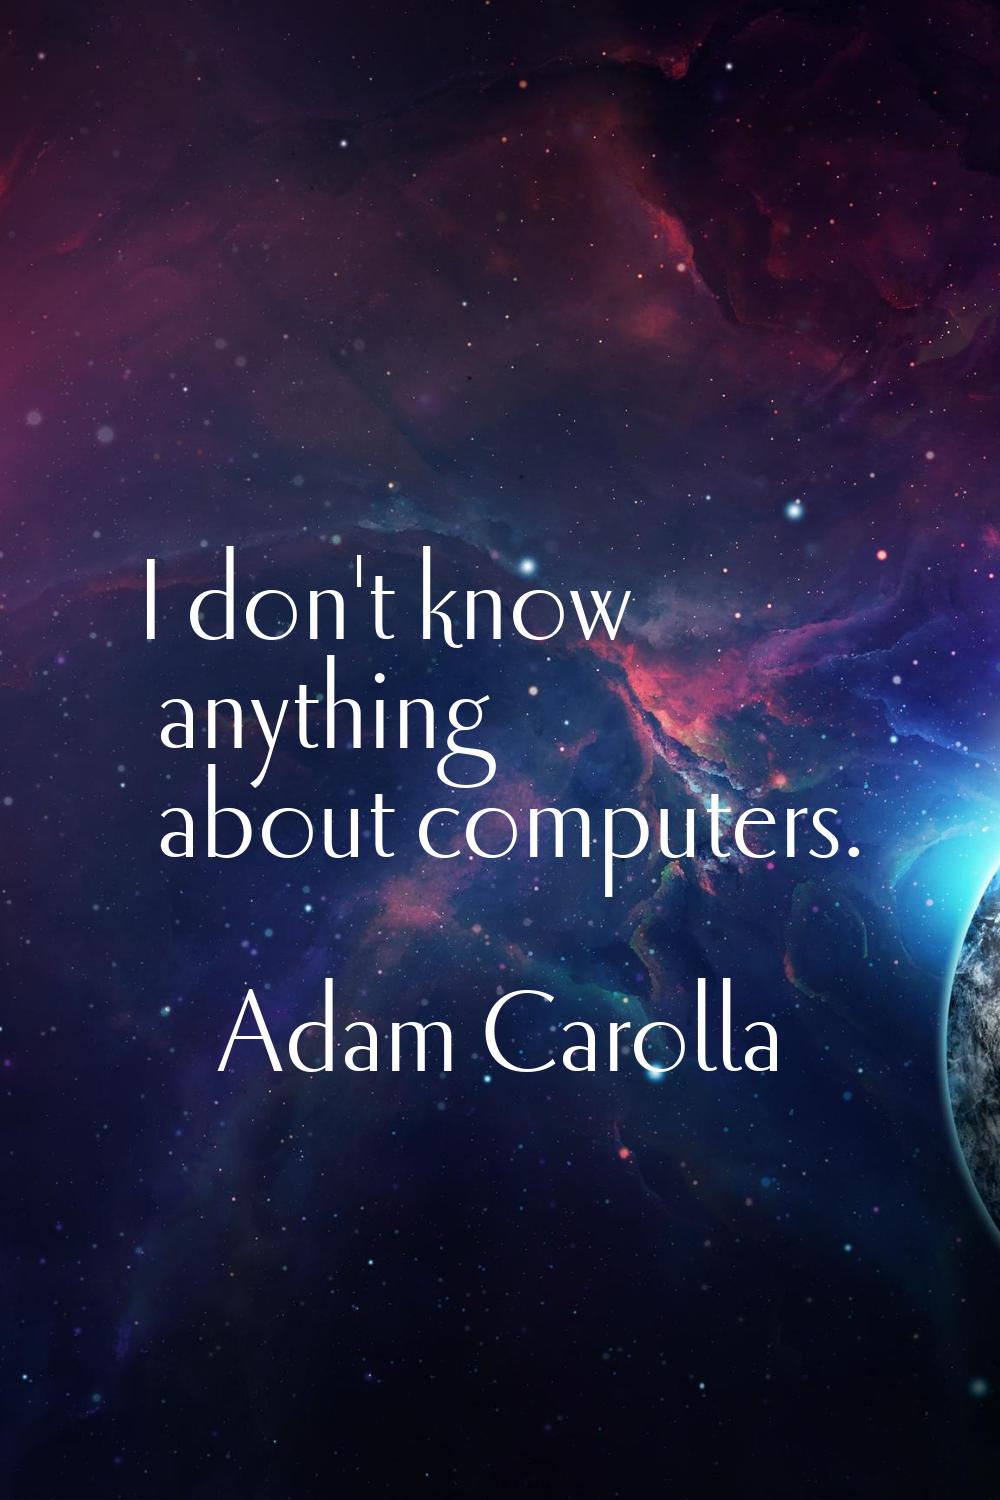 I don't know anything about computers.